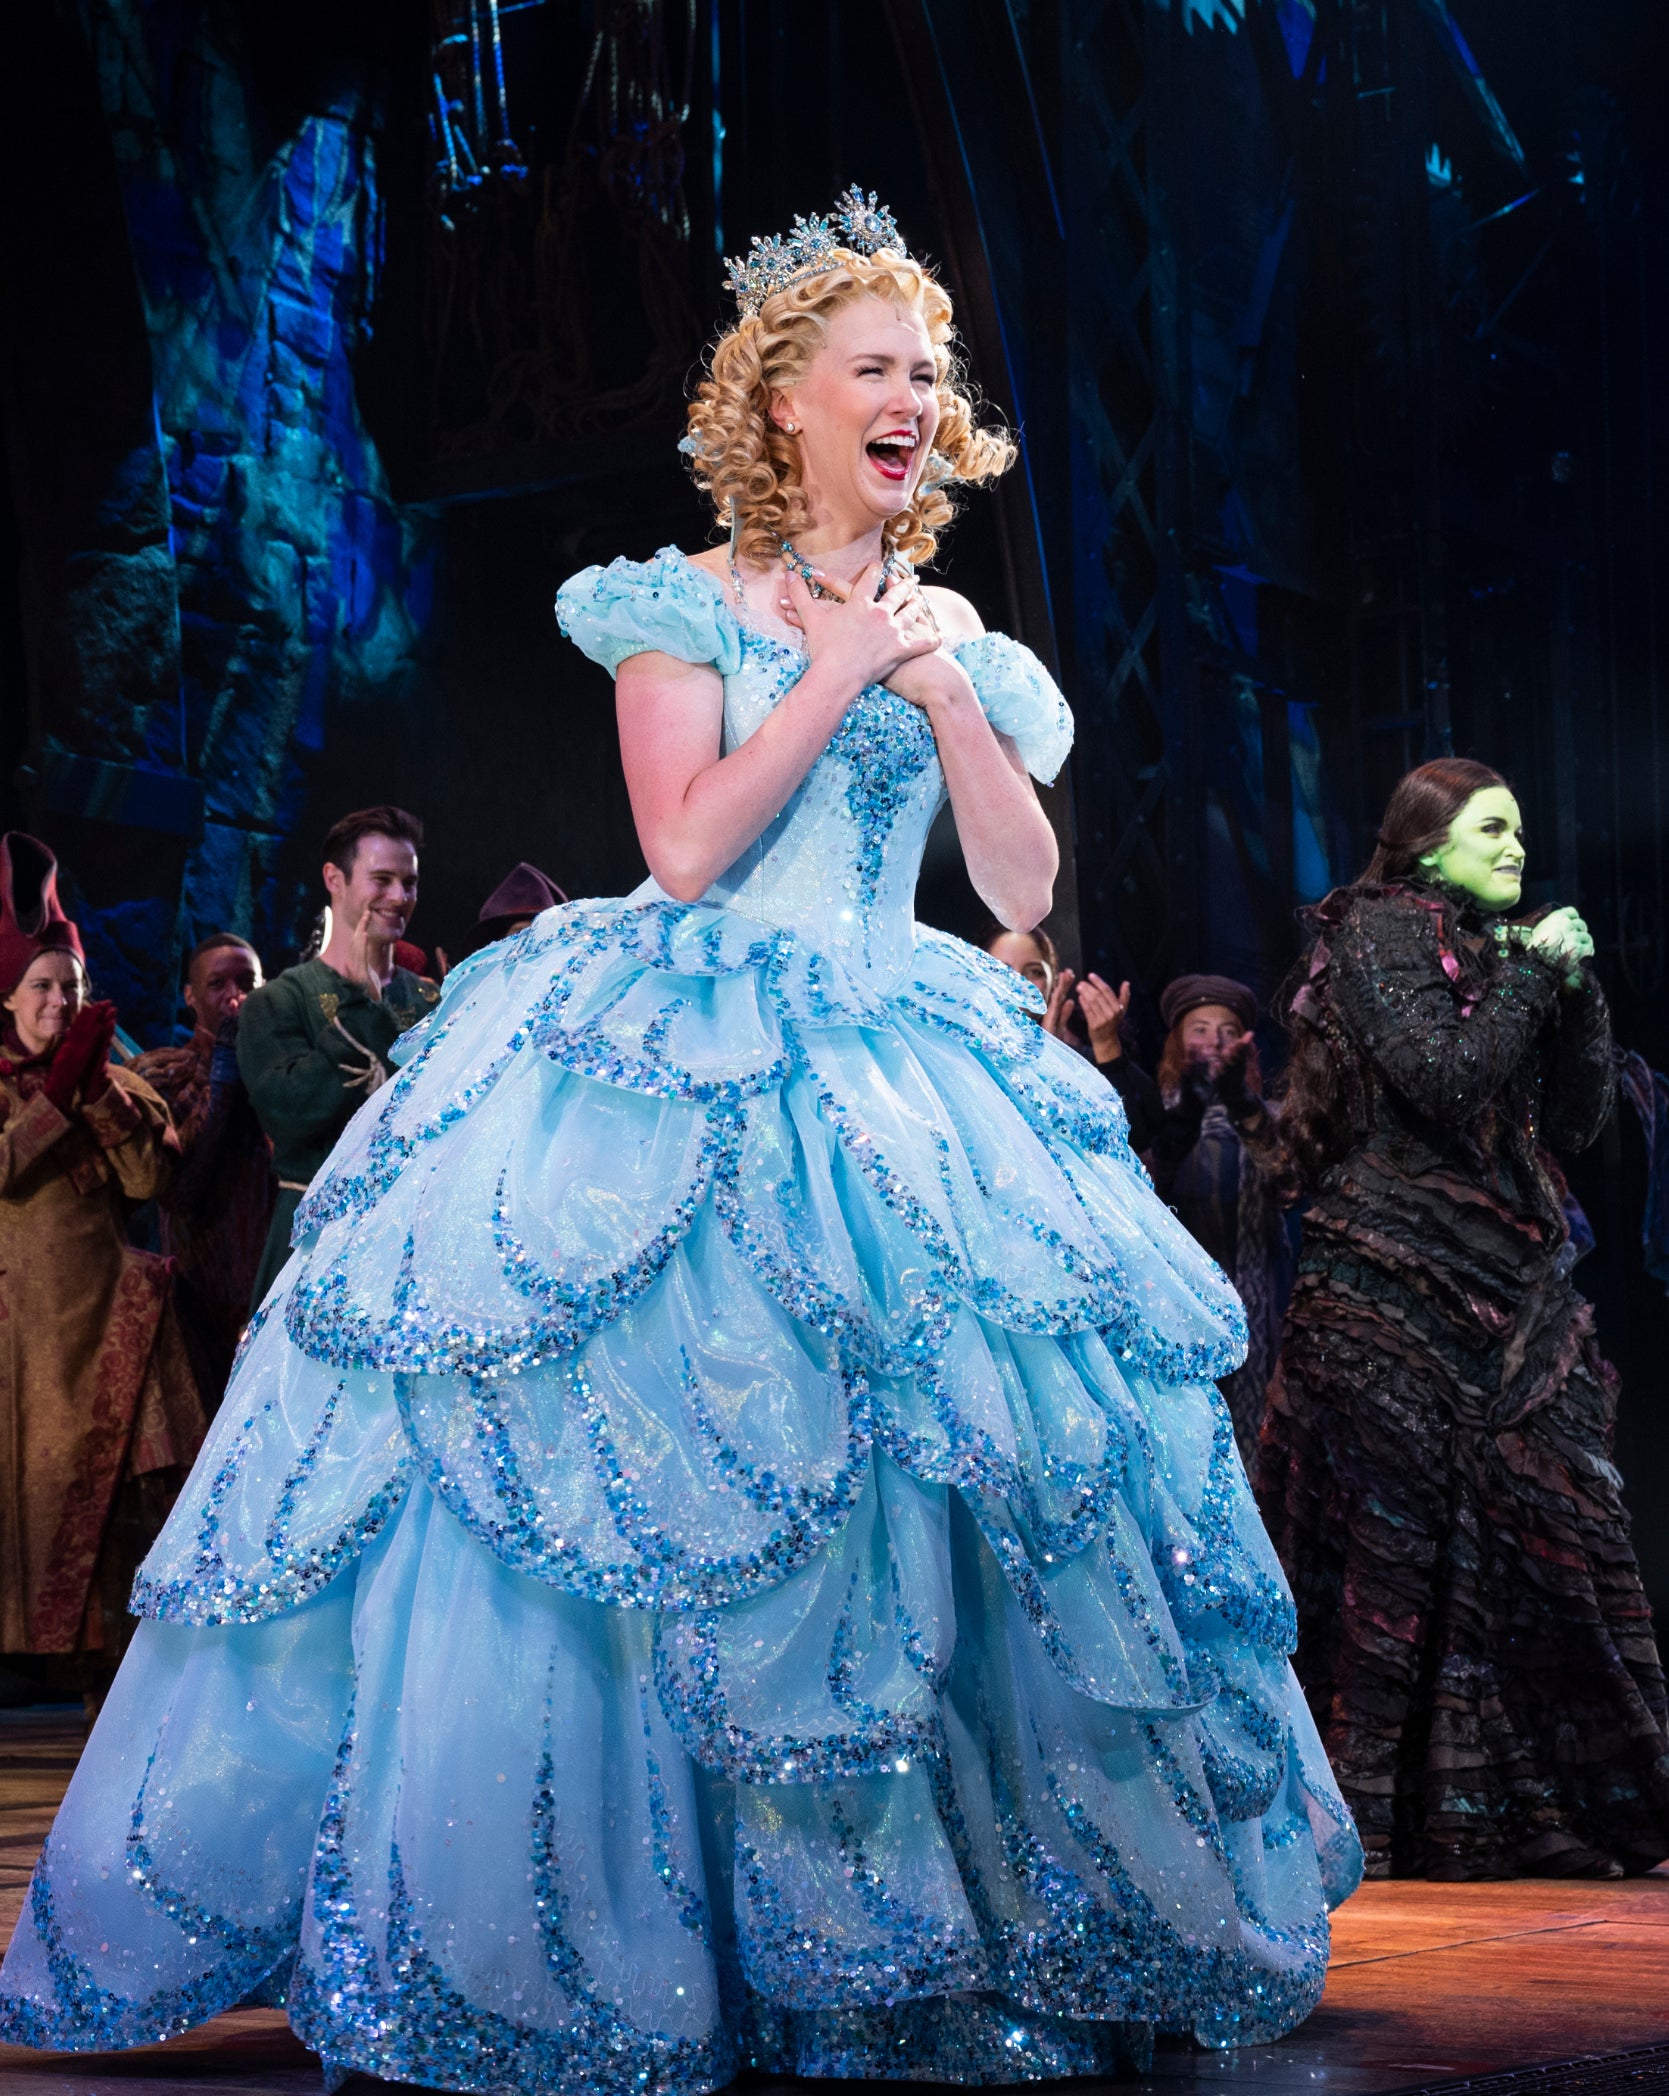 Glinda in the sequined gown onstage